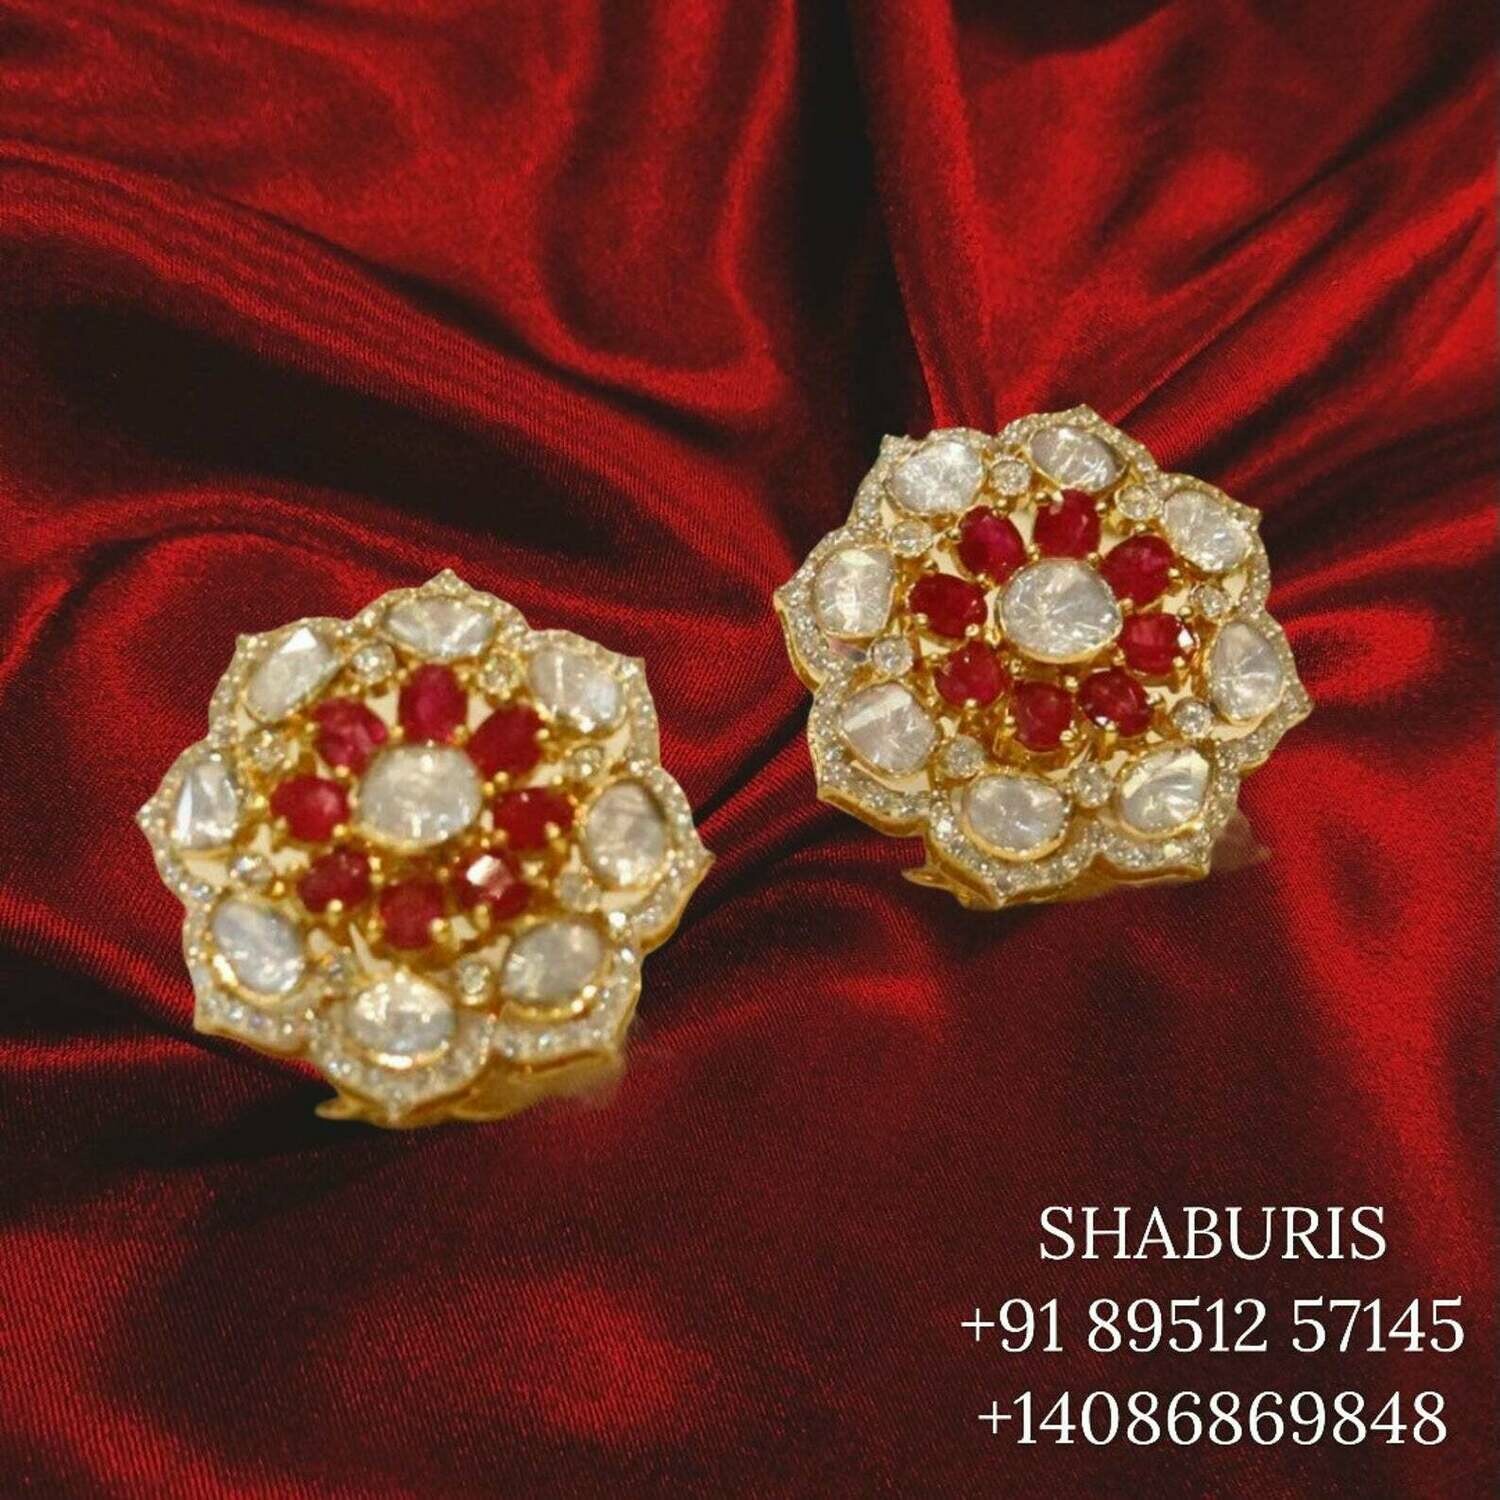 Pure Silver jewelry Indian ,polki Studs,gold jewelry designs indian look a like gem stone jewelry gold price india ruby stones SHABURIS